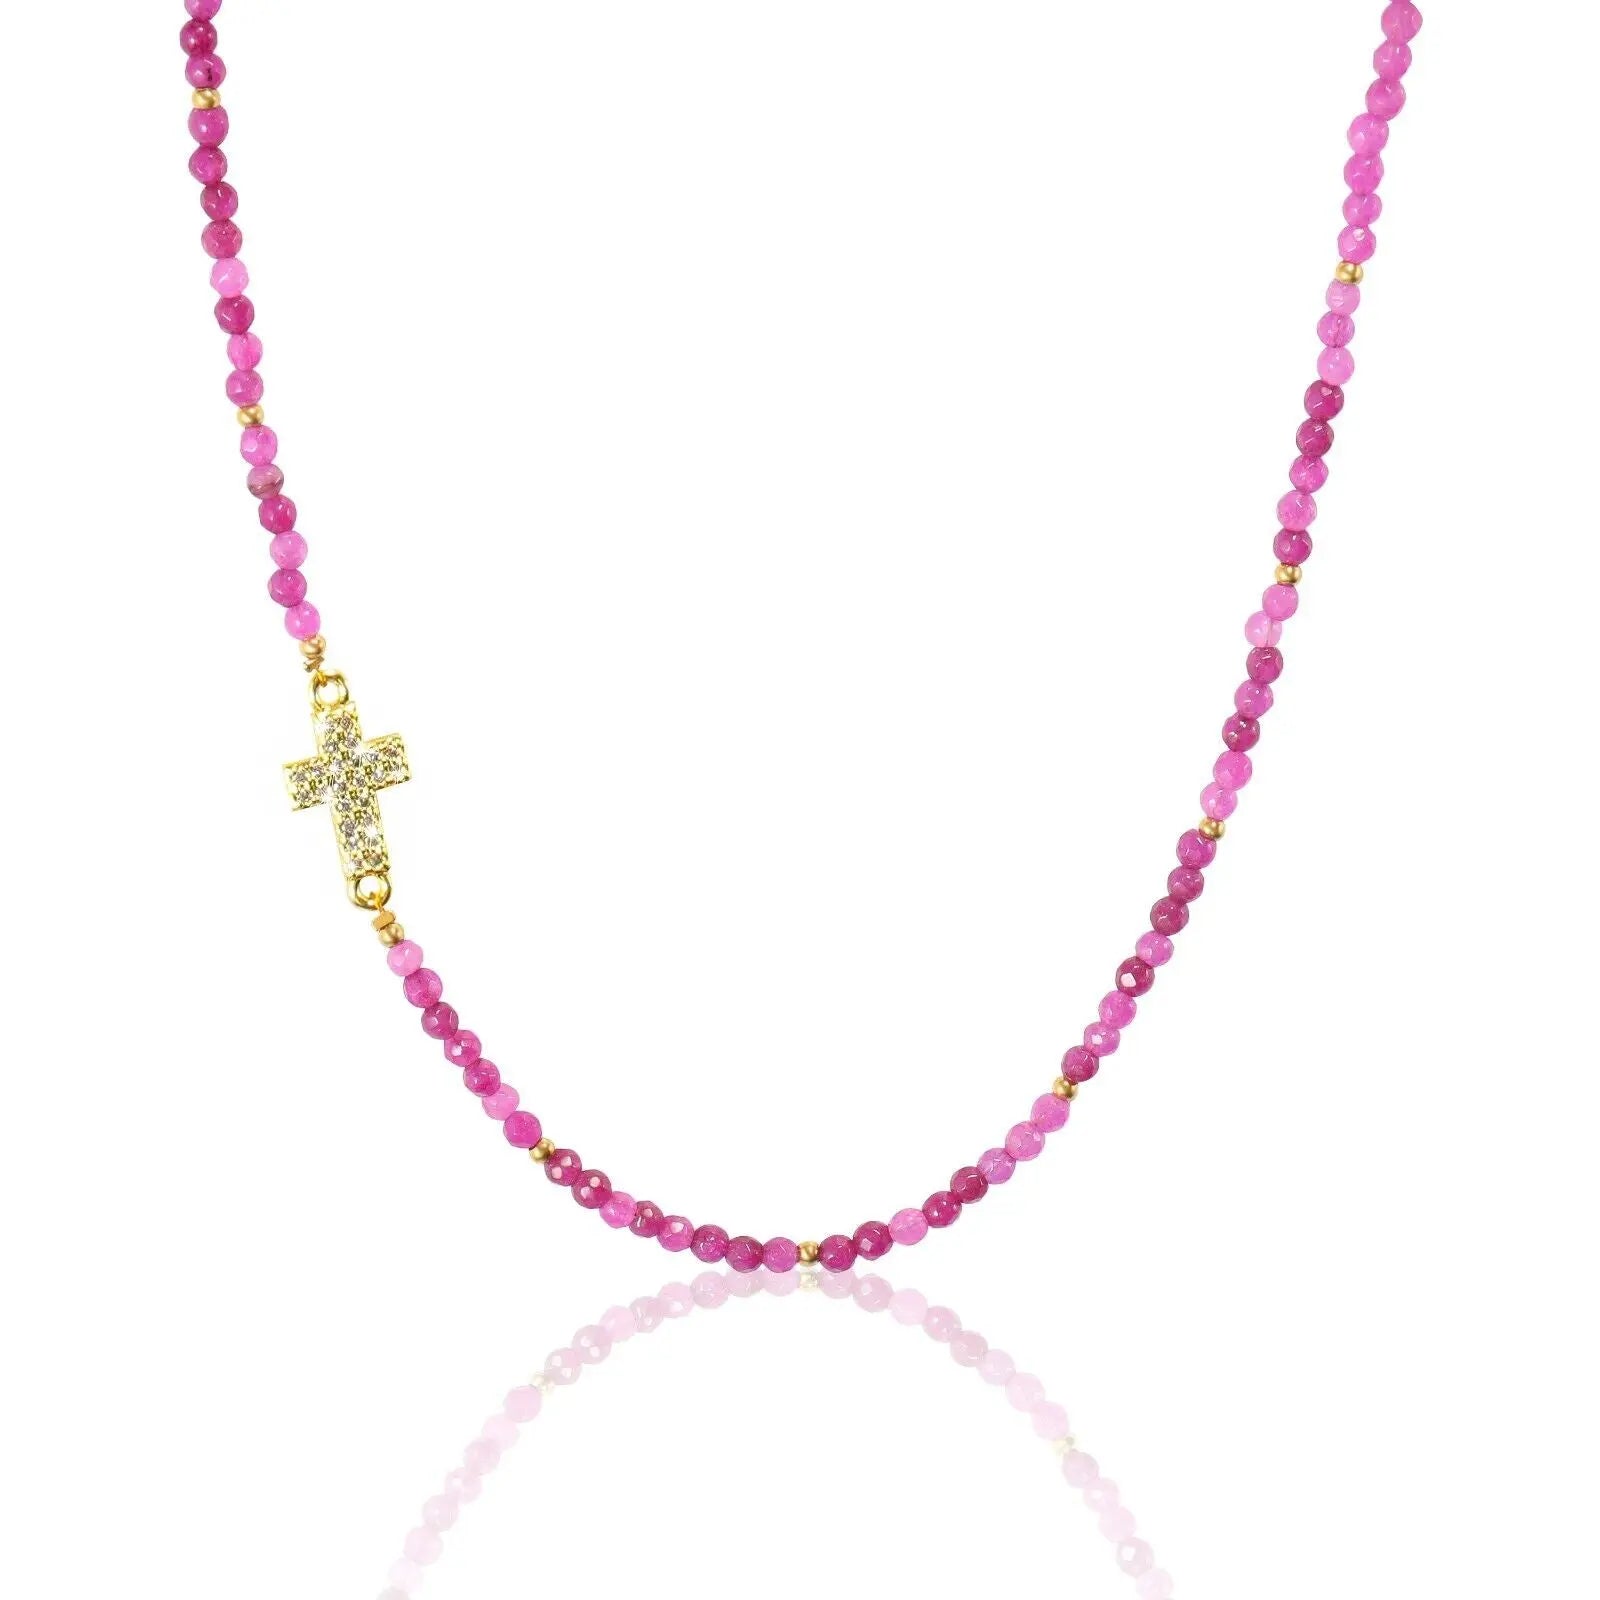 Amethyst Beads Gemstones 15" Women Necklace Choker with Cross Faith Necklace 